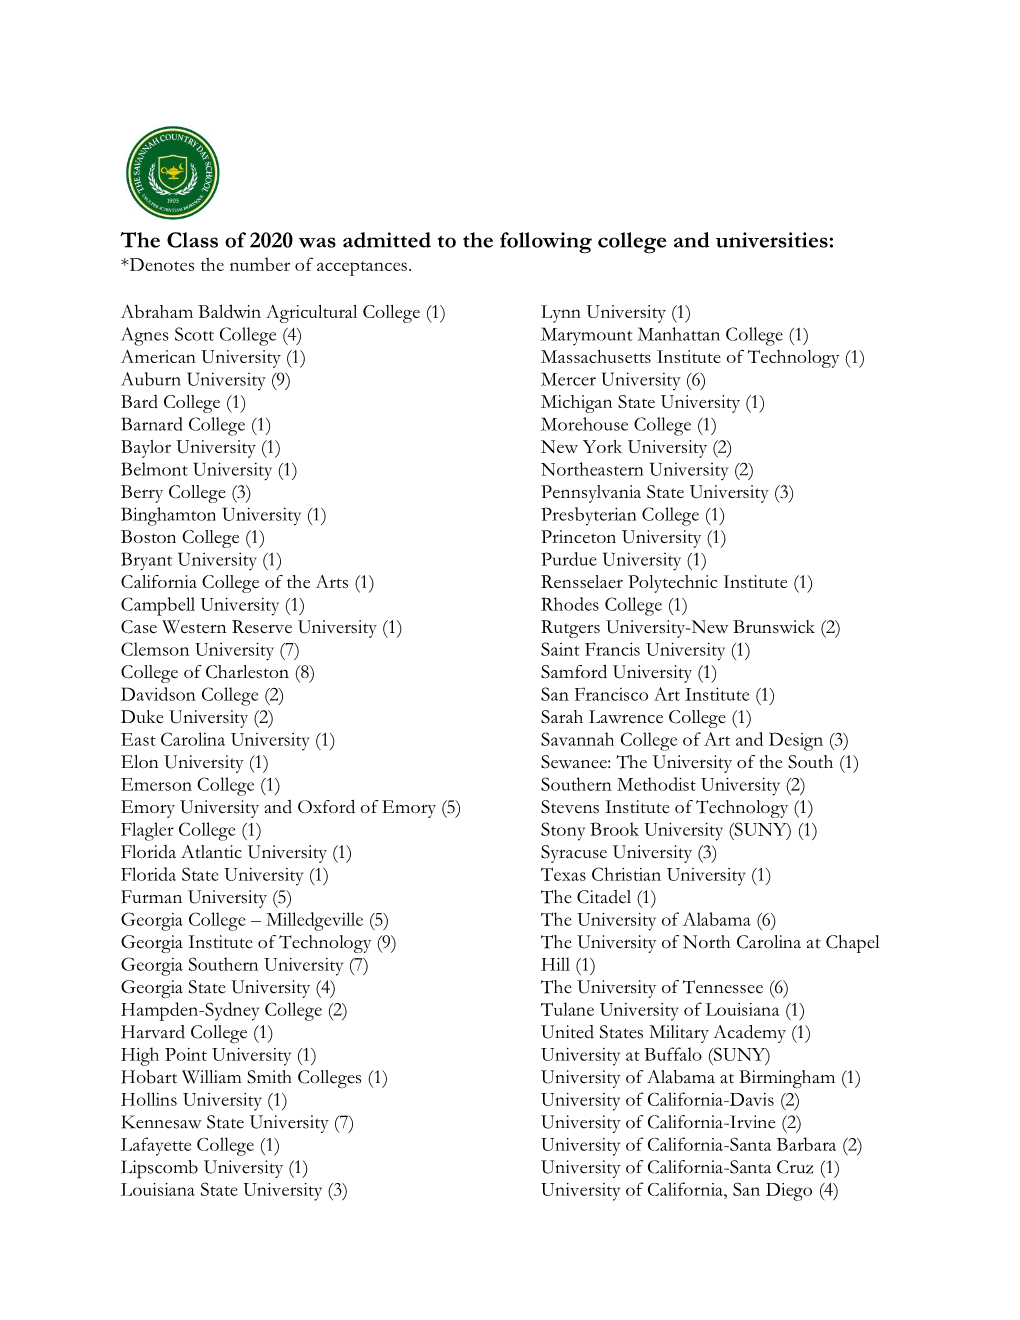 The Class of 2020 Was Admitted to the Following College and Universities: *Denotes the Number of Acceptances